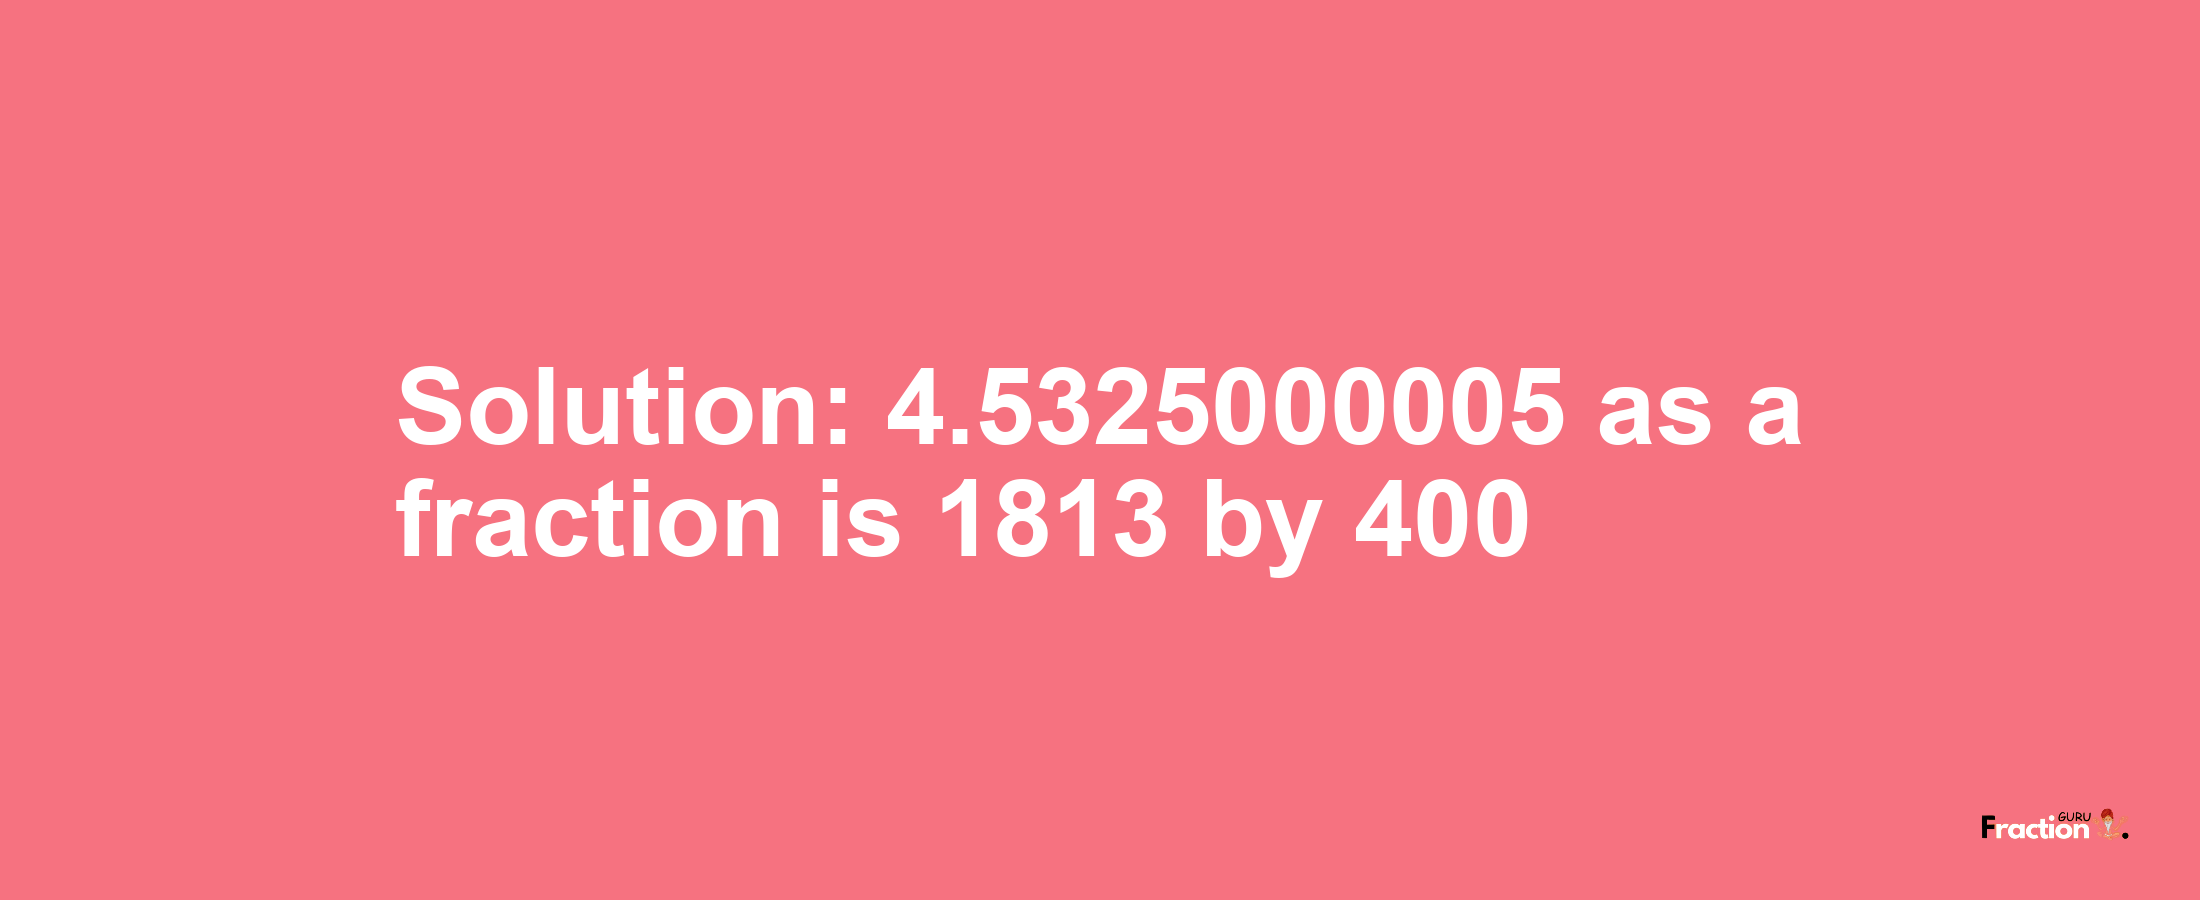 Solution:4.5325000005 as a fraction is 1813/400